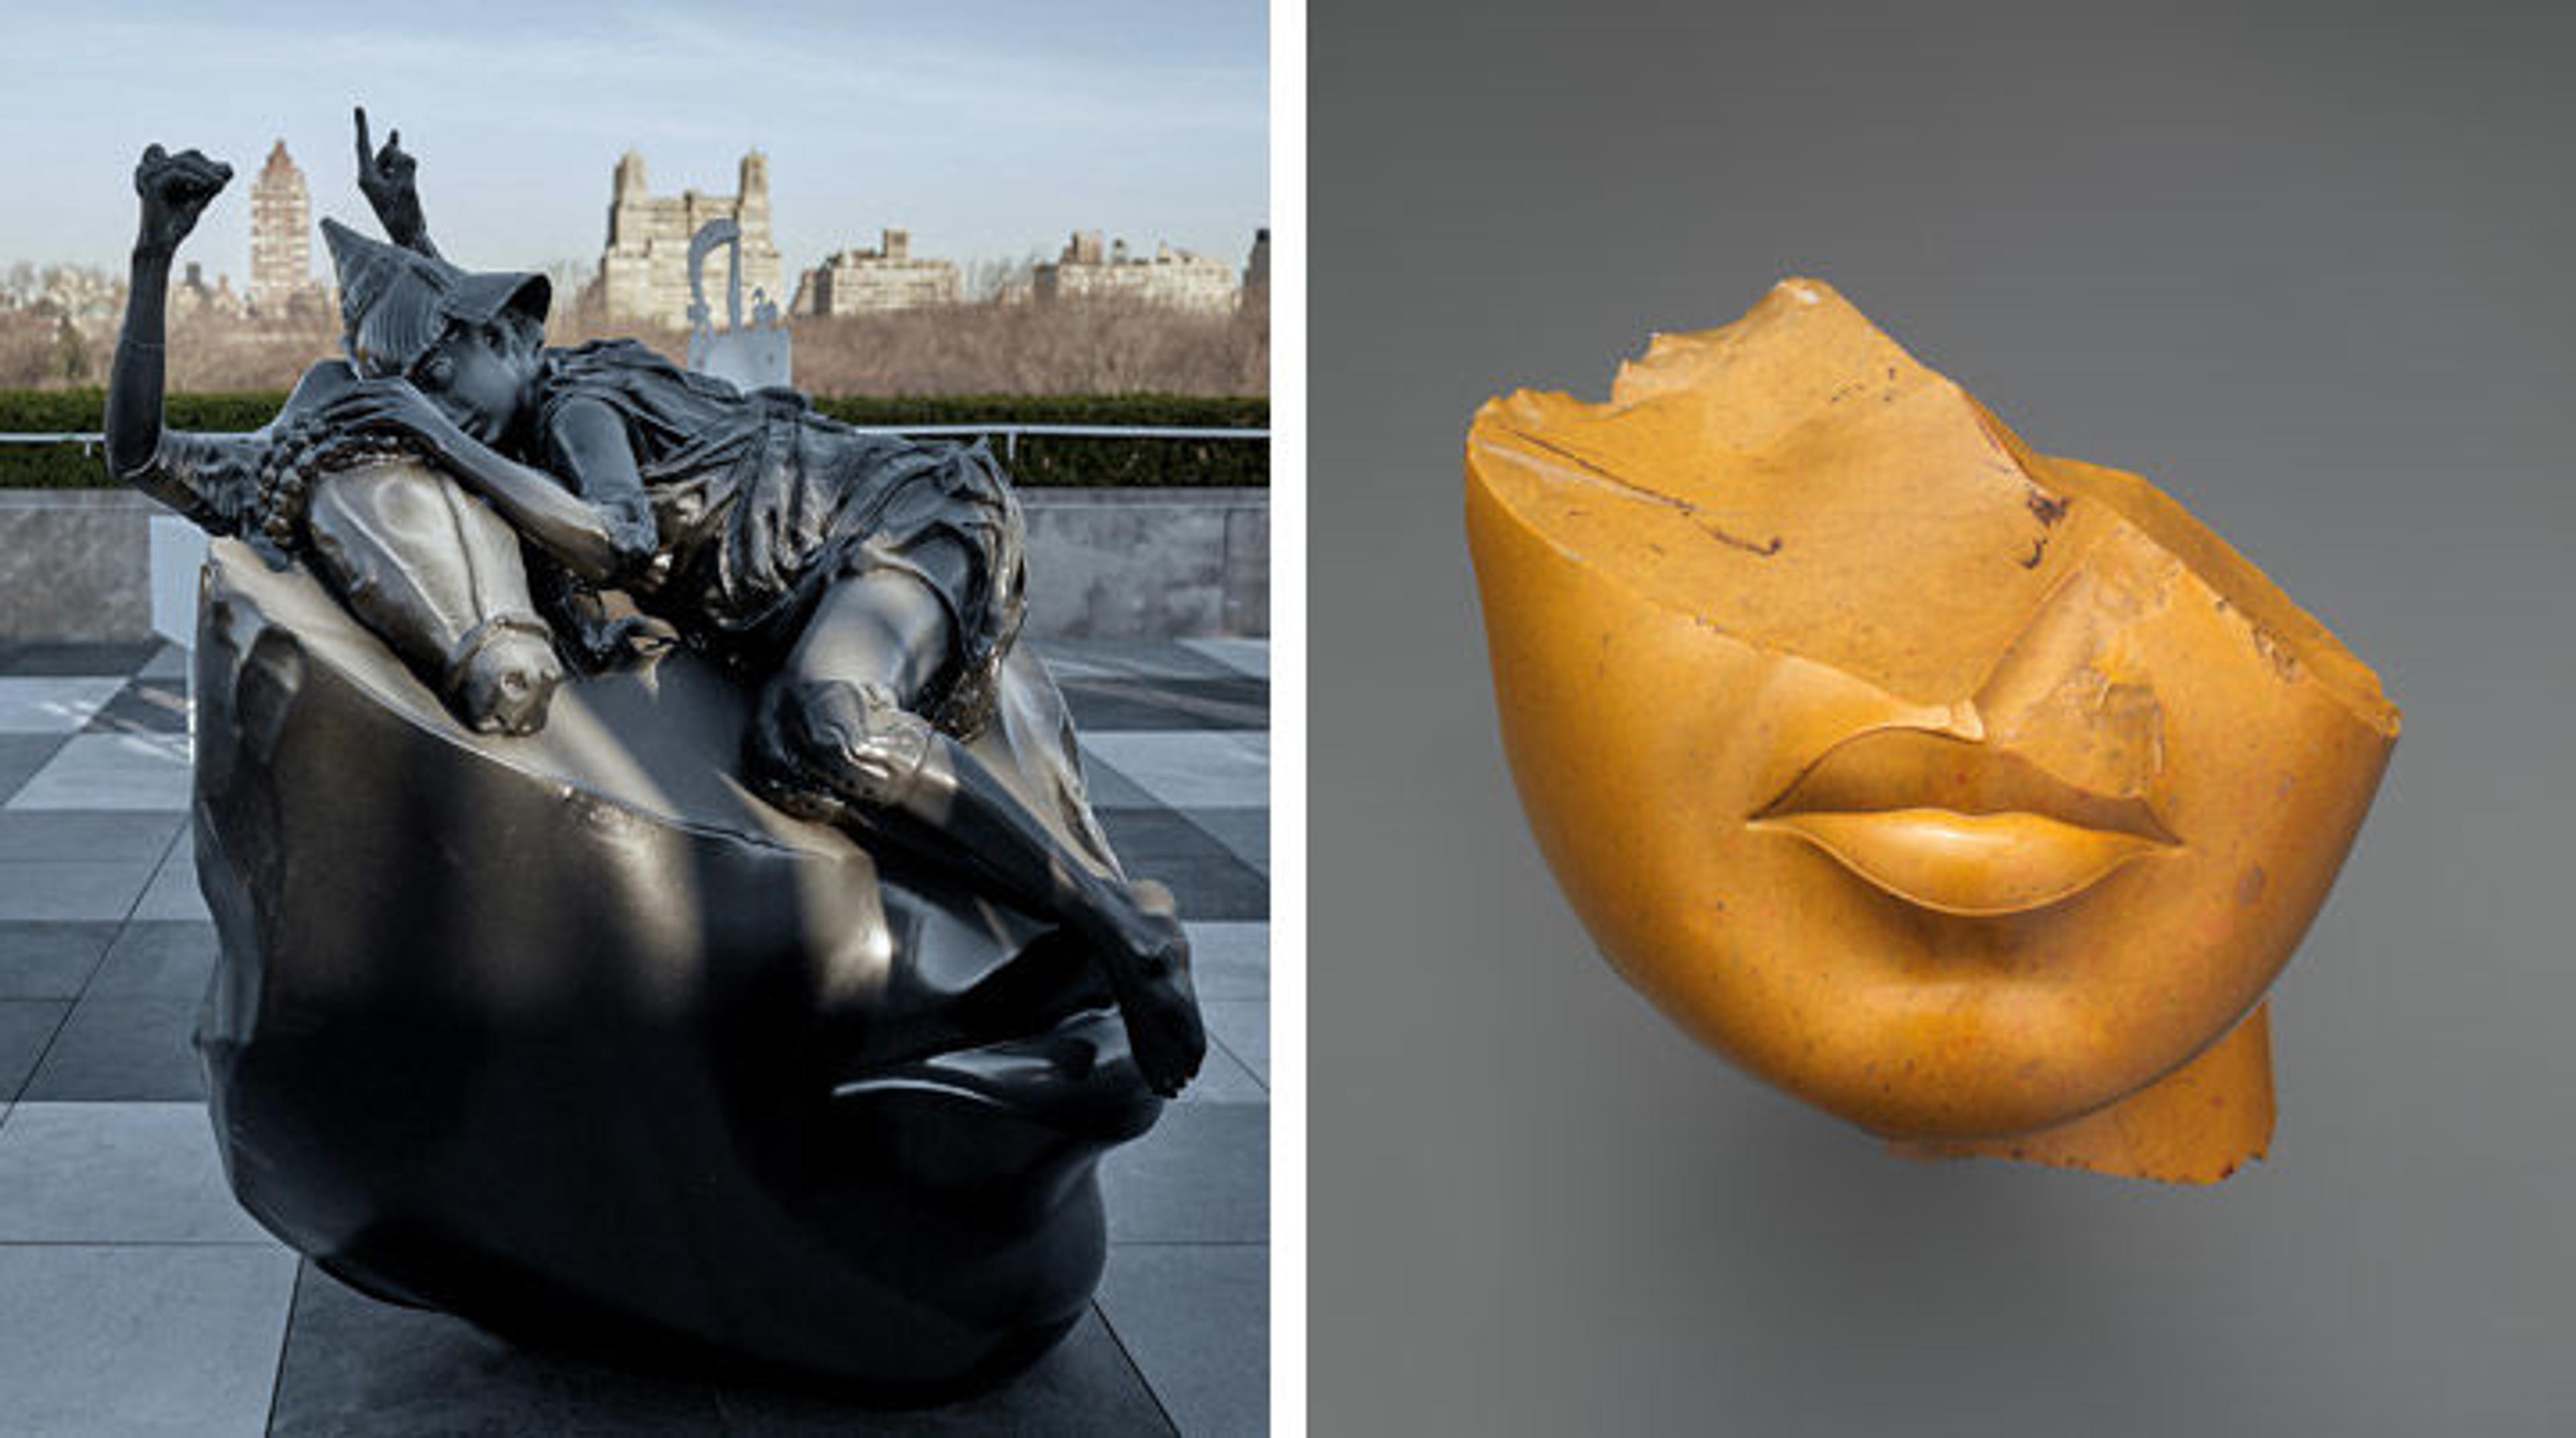 Left: View of Adrian Villar Rojas's Theater of Disappearance on The Met's Cantor Roof Garden. Right: fragment of a queen's head from Ancient Egypt 